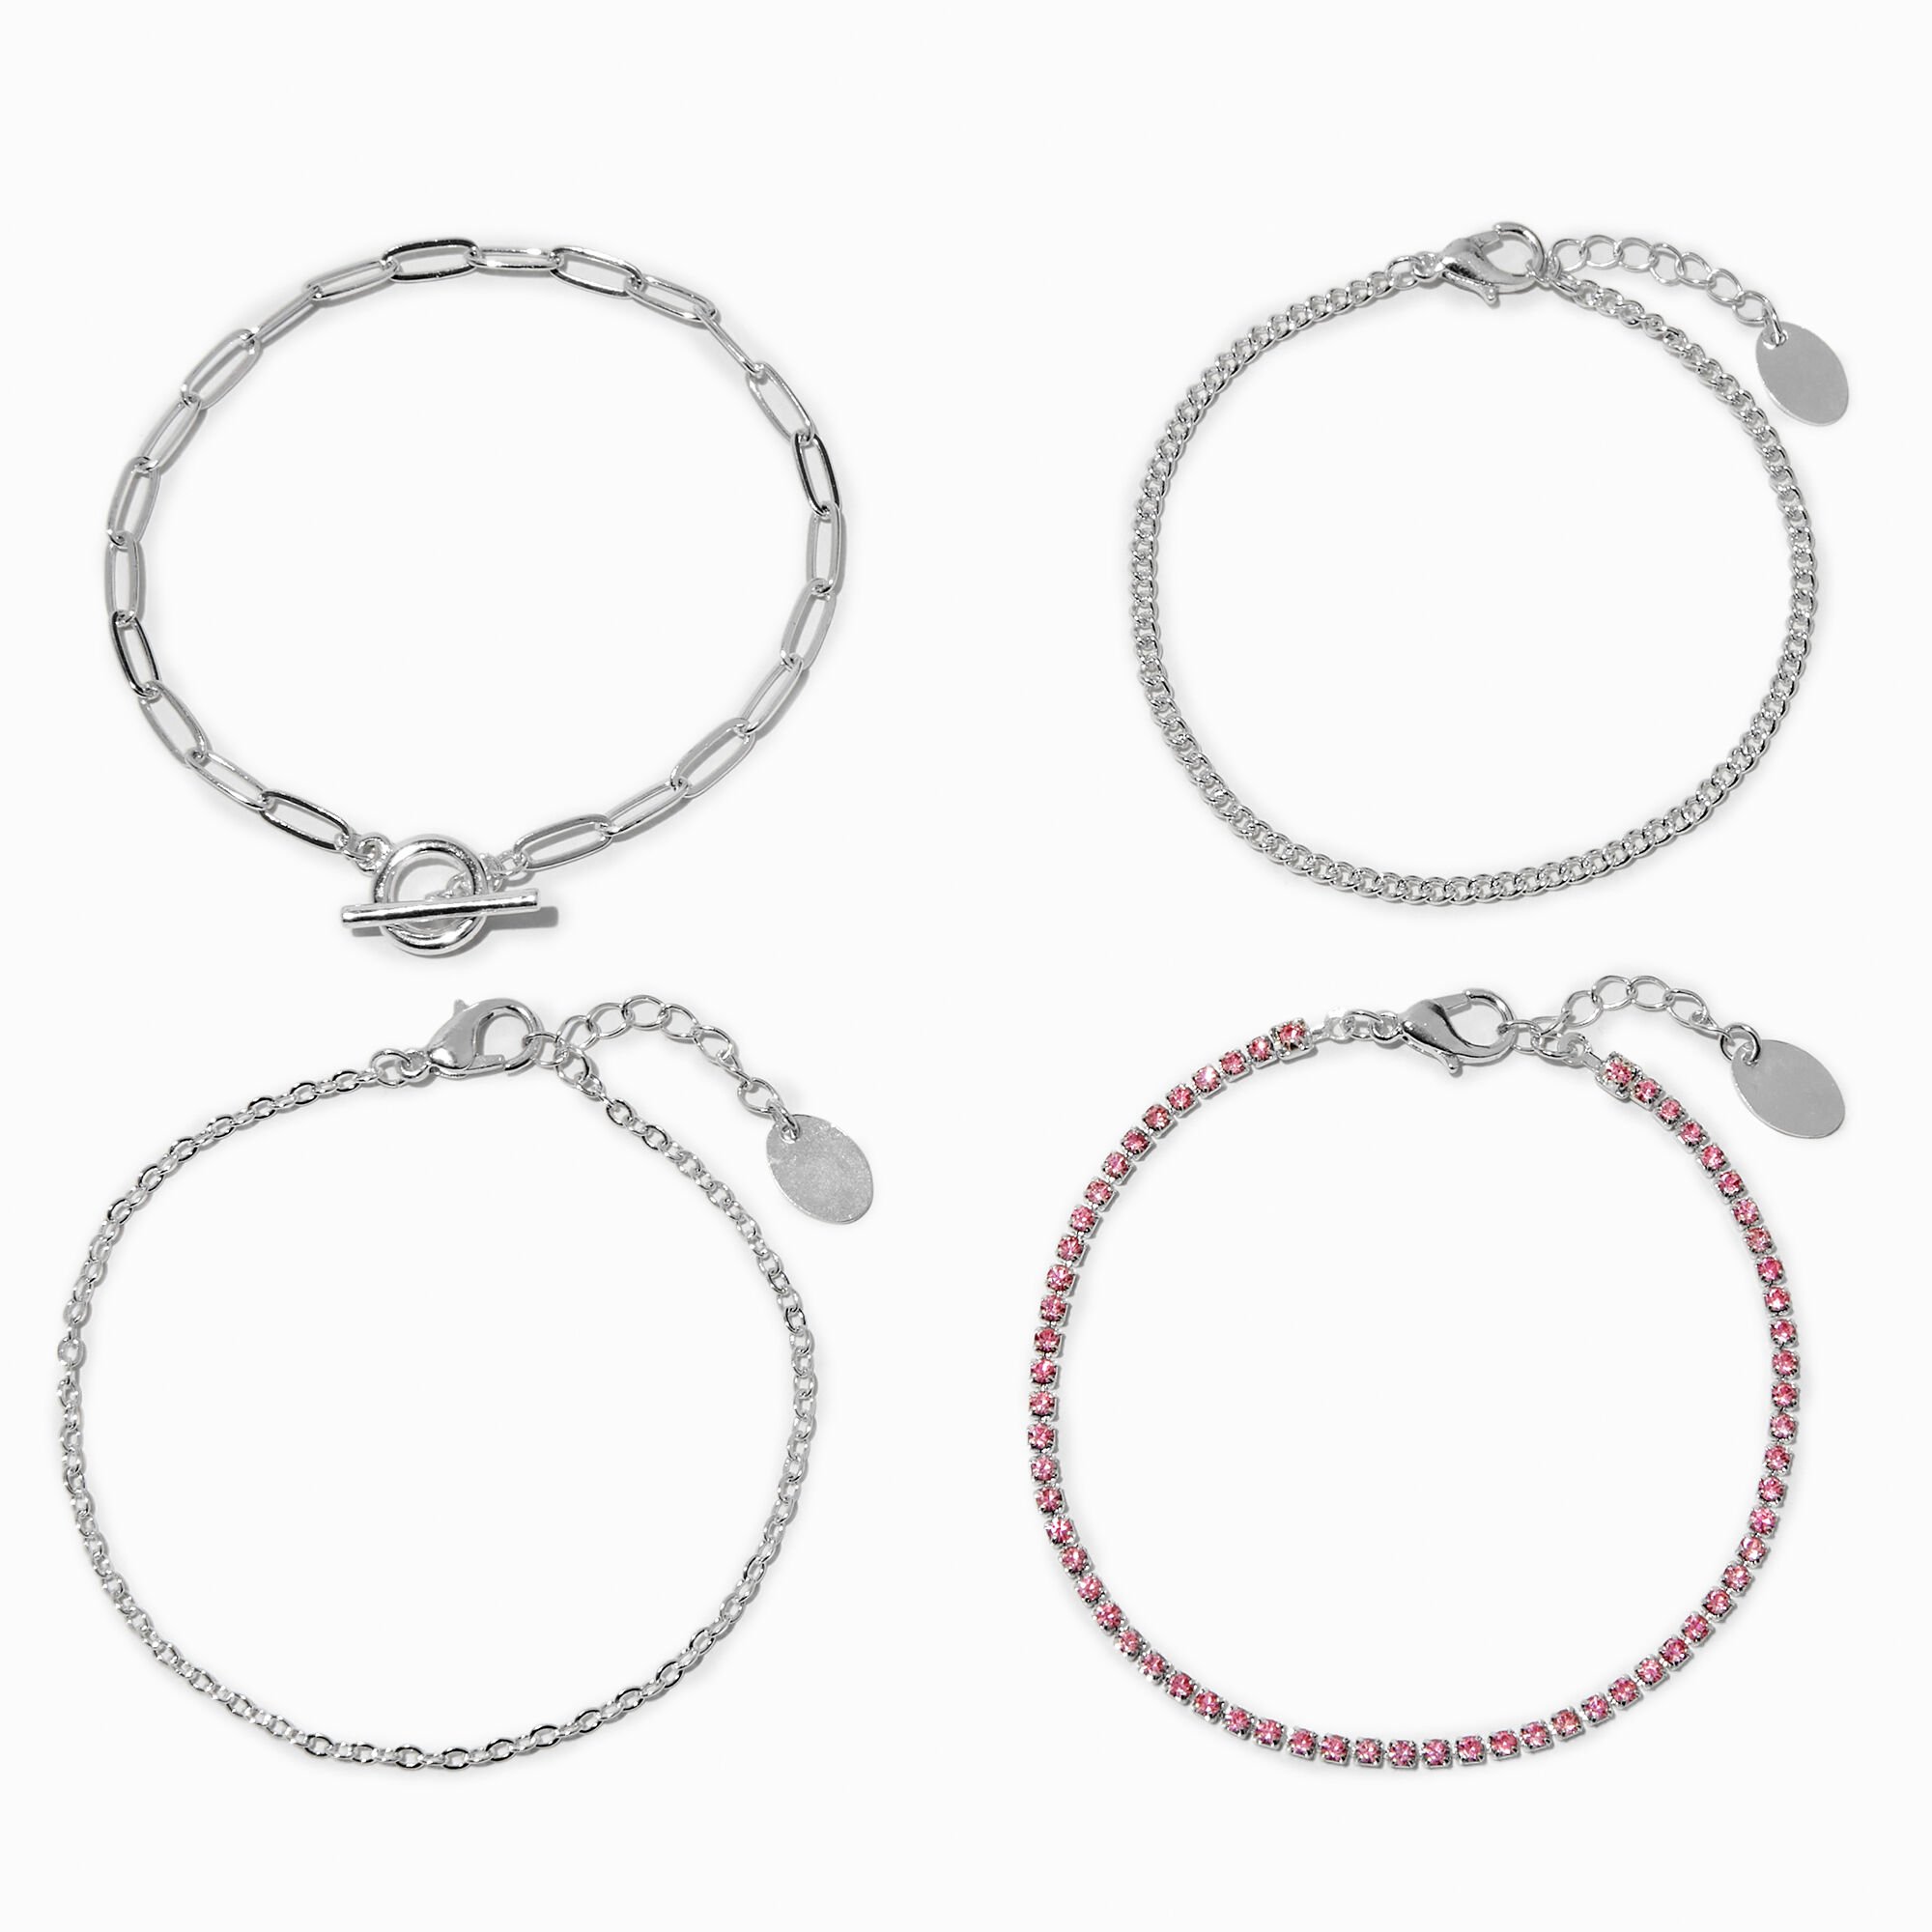 View Claires SilverTone Cup Chain Bracelet Set 4 Pack Pink information